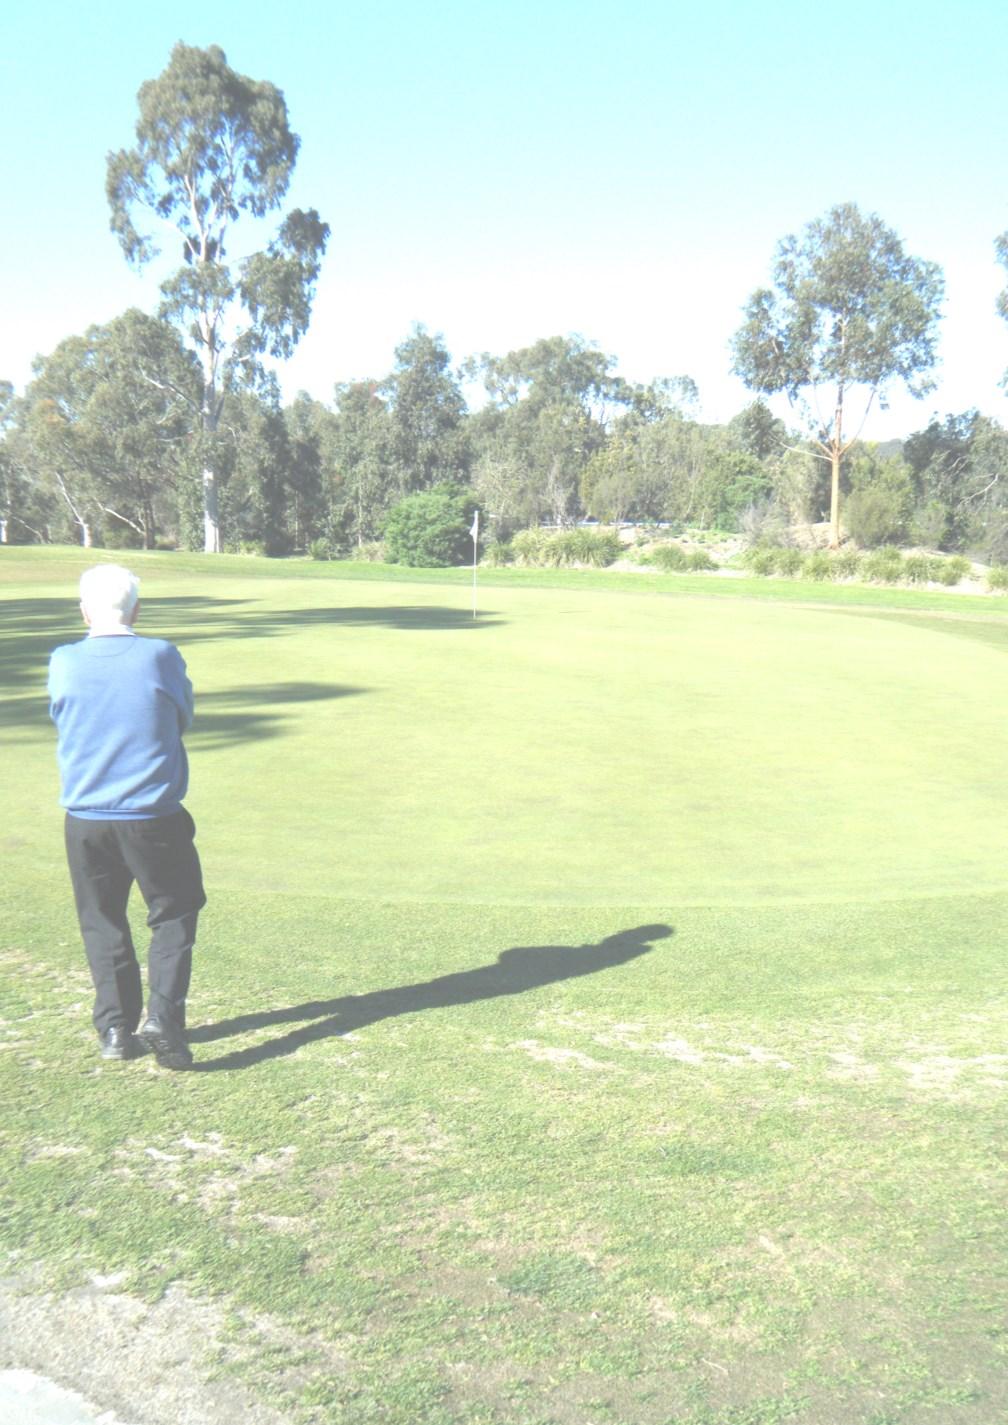 RICH RIVER POEM 2018 Well here we are: we re off again, we ve come up to the Murray To play a bit of golf and then we ll try the chef s new curry, We brought the lady folks along, to join in the